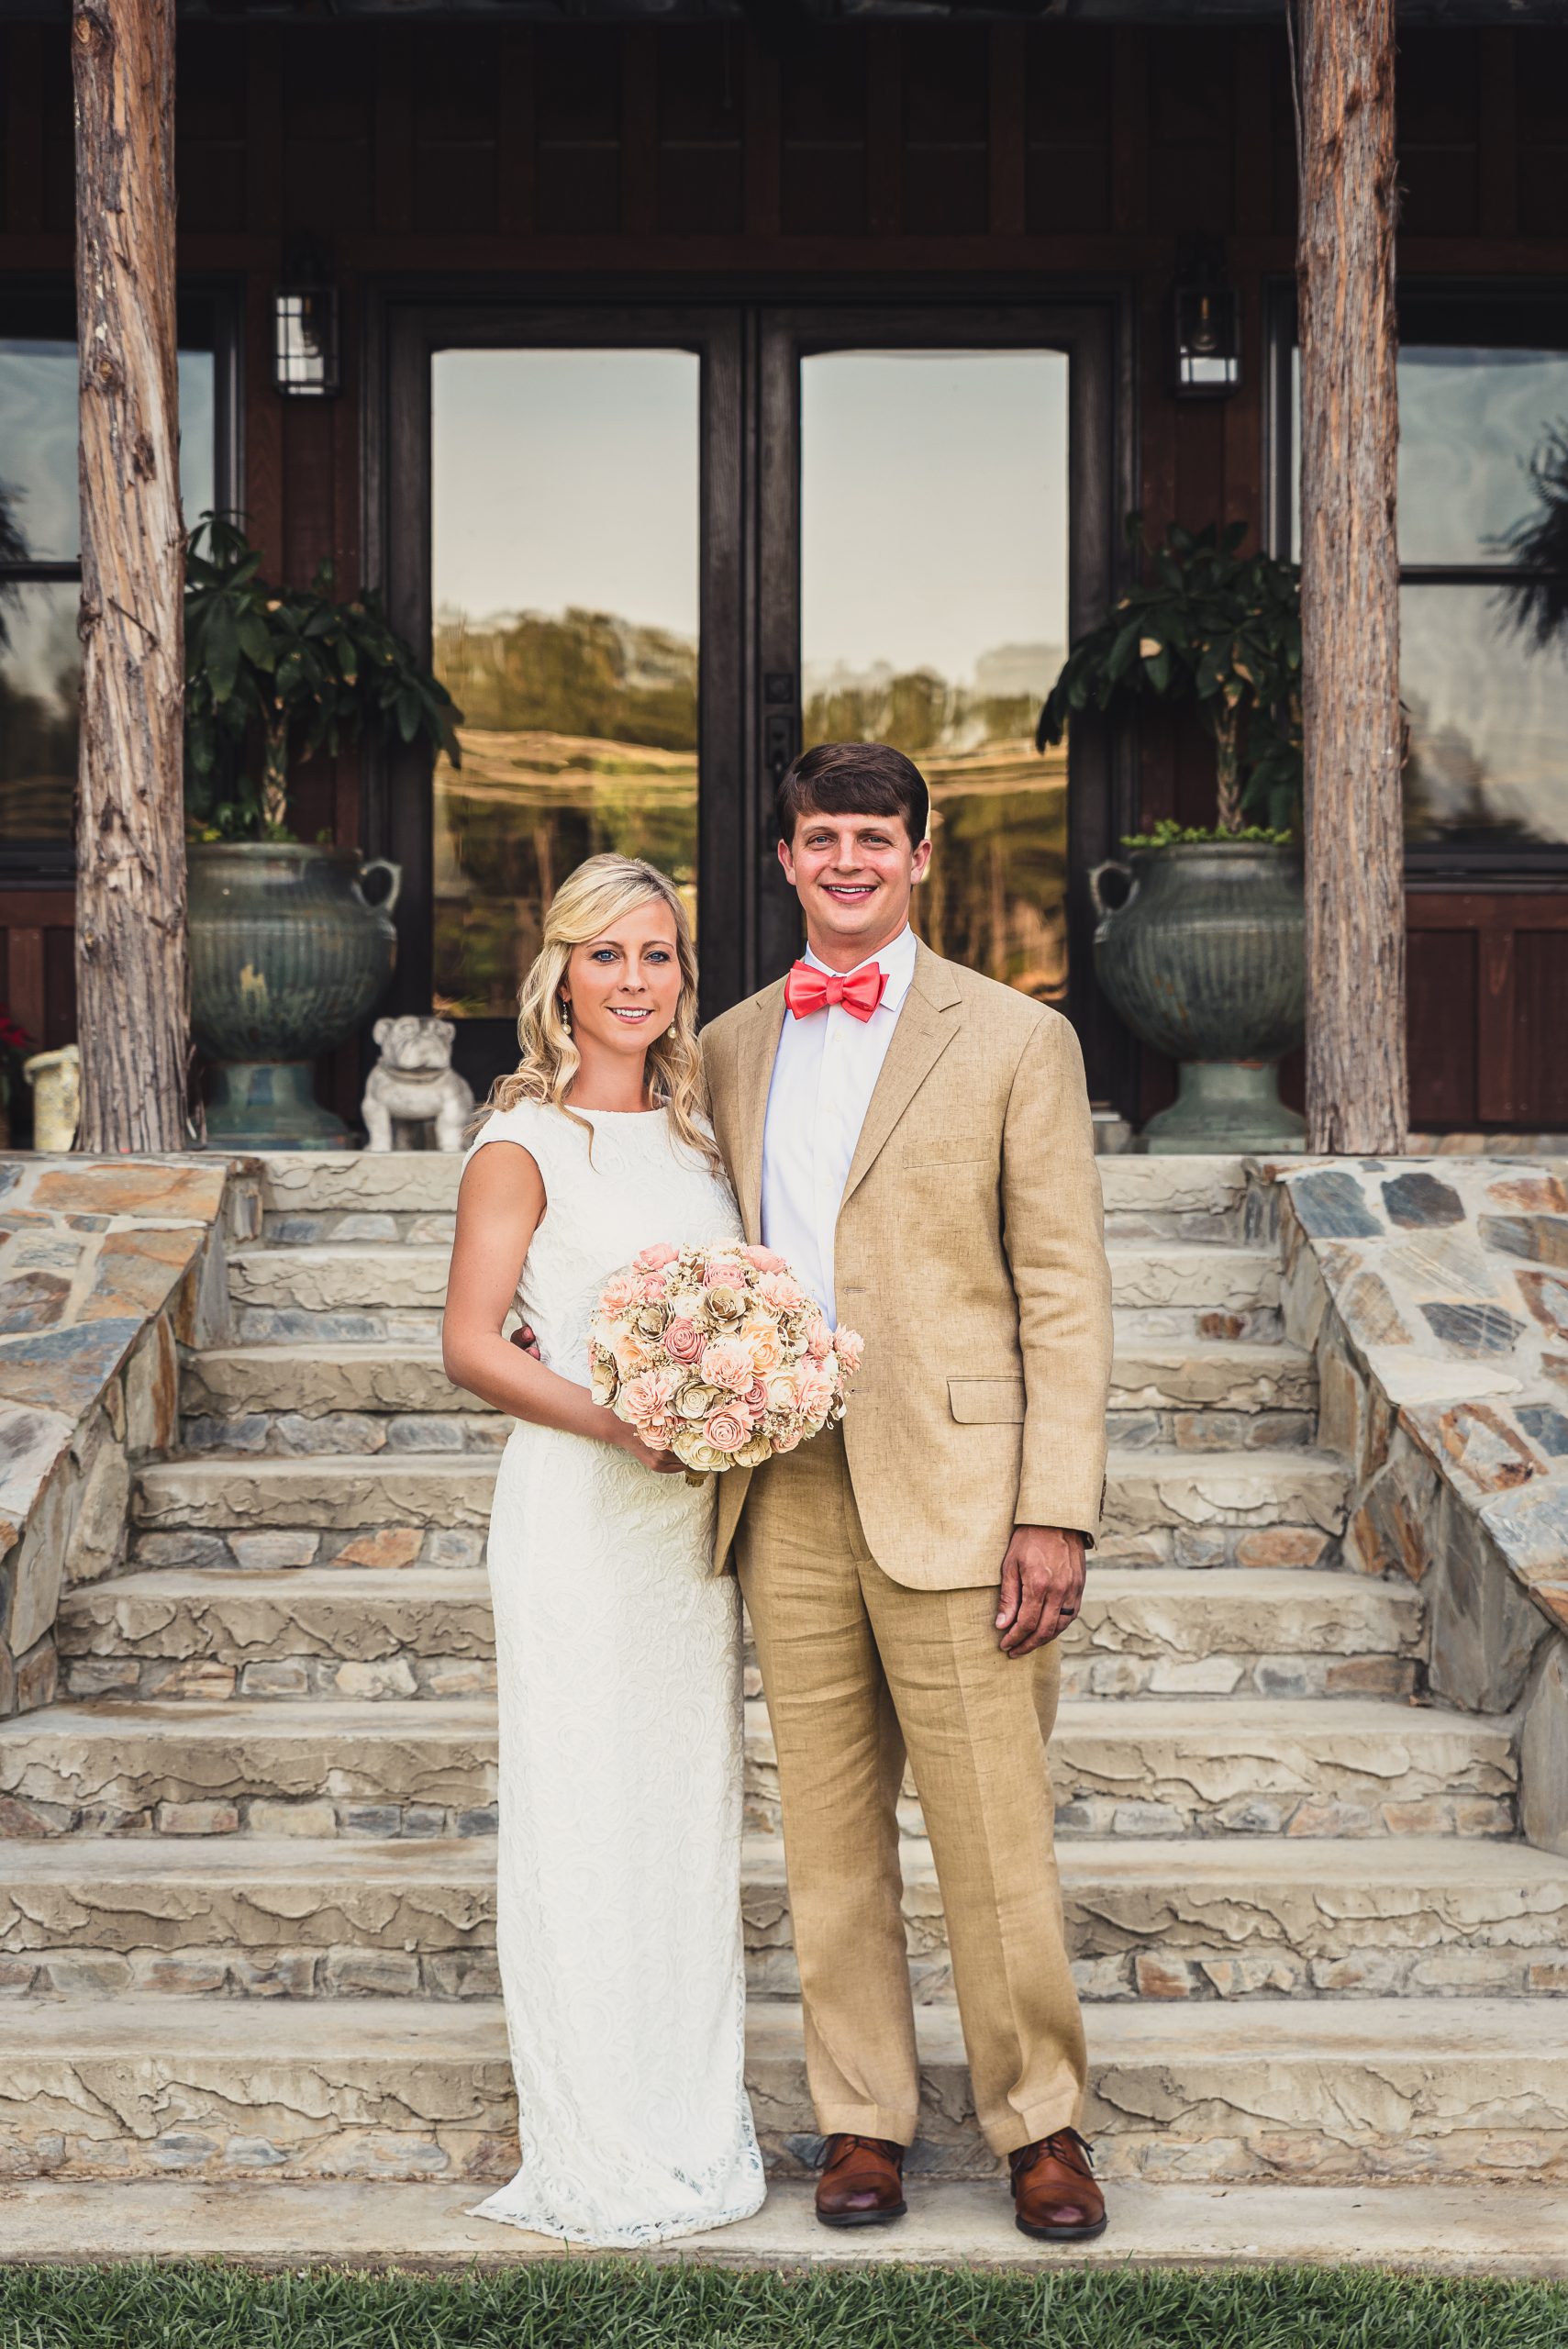 Casey Colbert and Ambrose “Bosie” Morris wed on April 4 at Grooms Cabin in rural Evans County, Georgia. The ceremony was officiated by Bosie’s lifelong friend and Columbia native Lucius Bullock. Photography by Evan Price Photography 